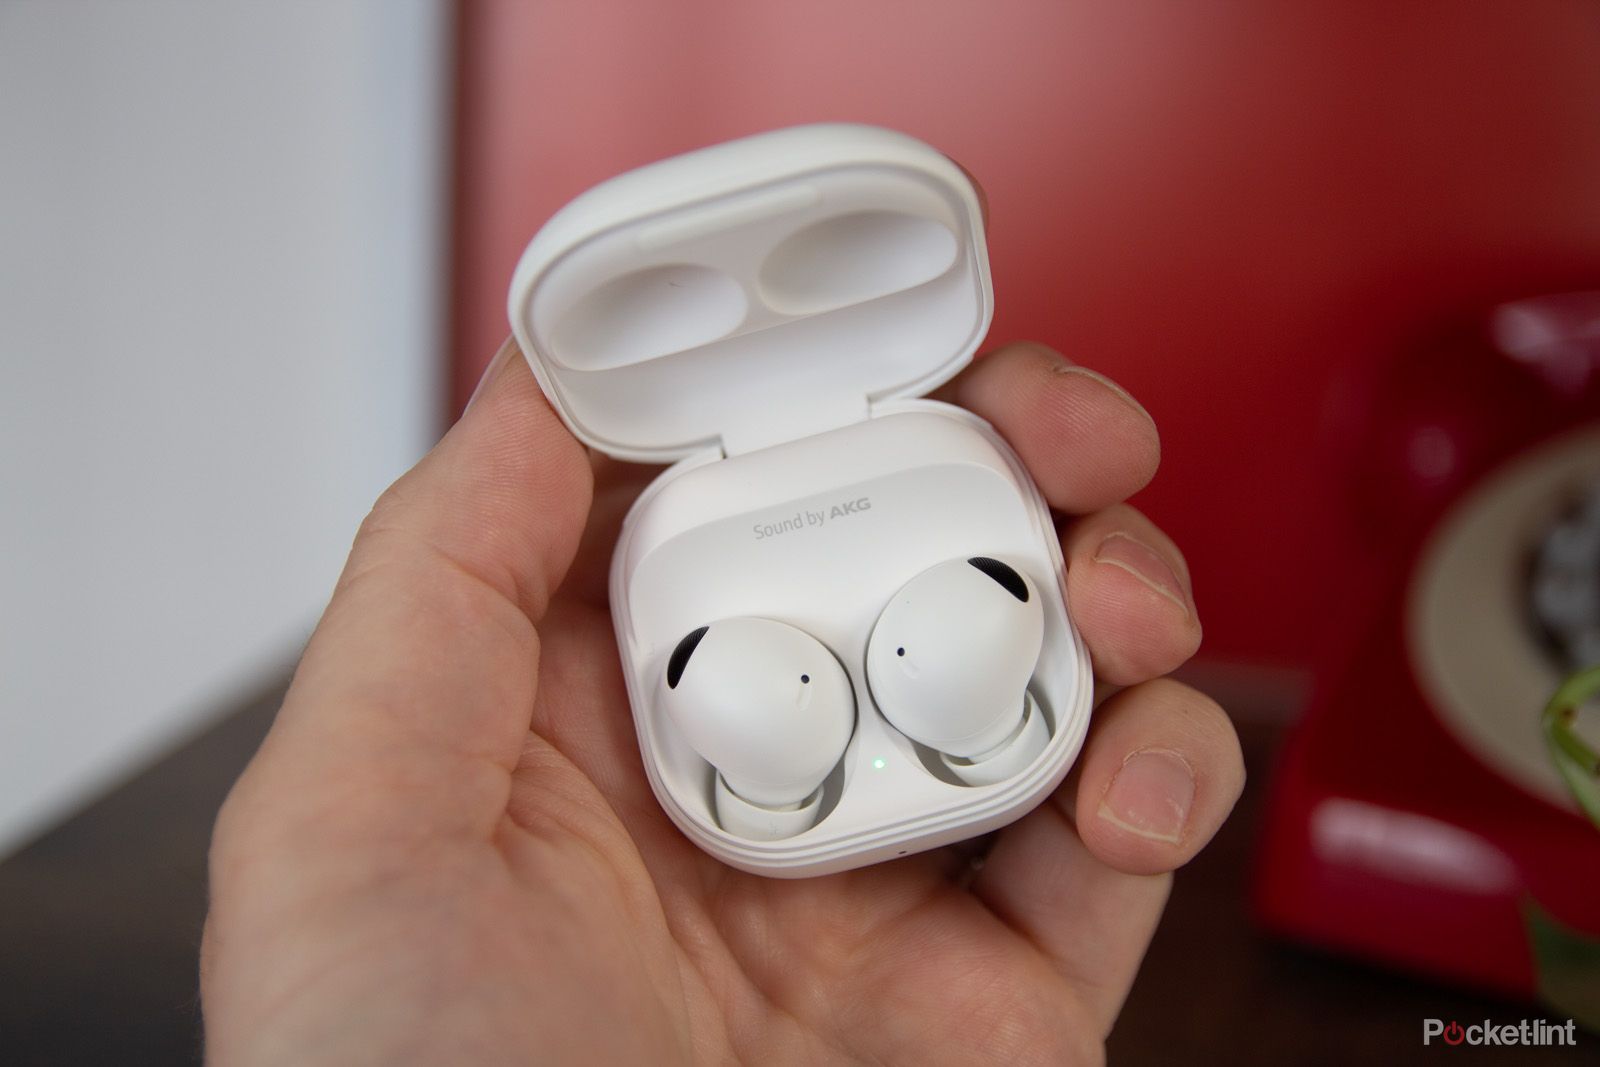 Samsung’s epic Galaxy Buds 2 Pro deal brings the price to as low as $85